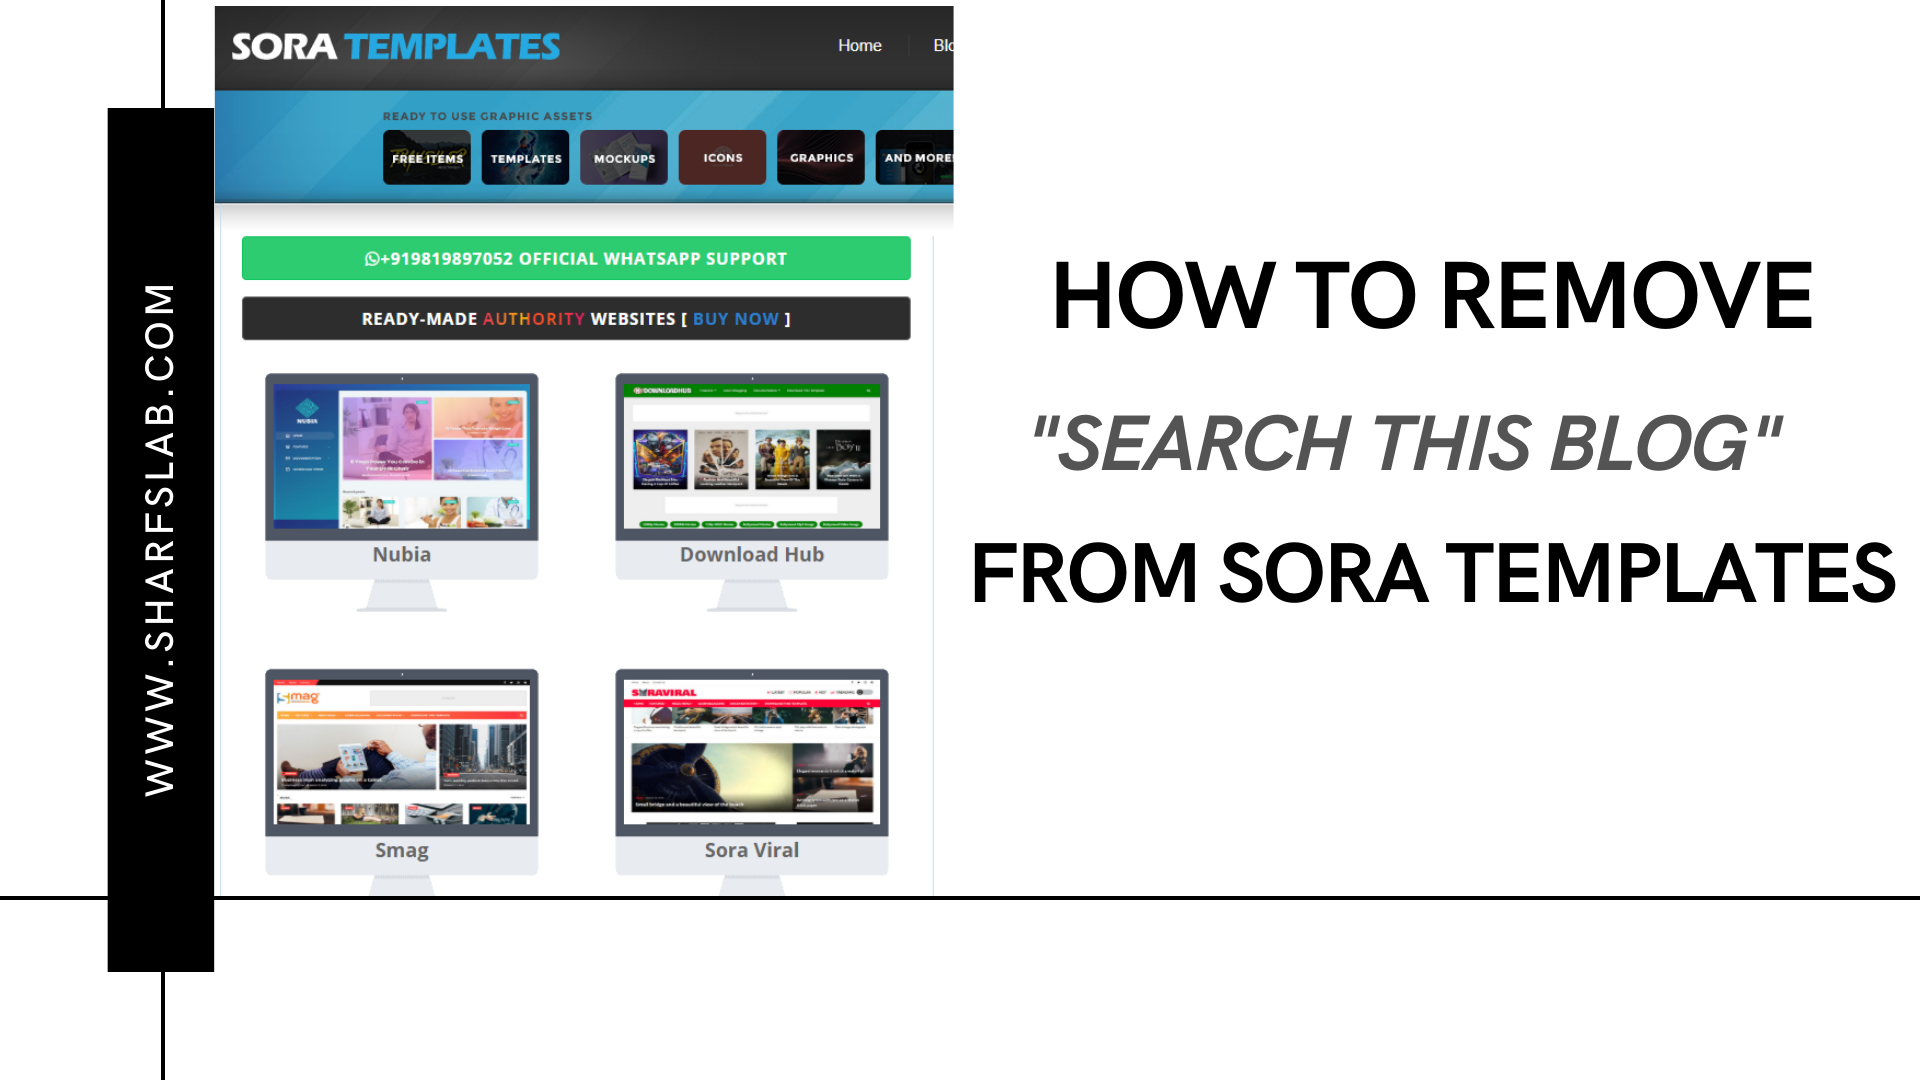 How to Remove Search this Blog from SORA Templates